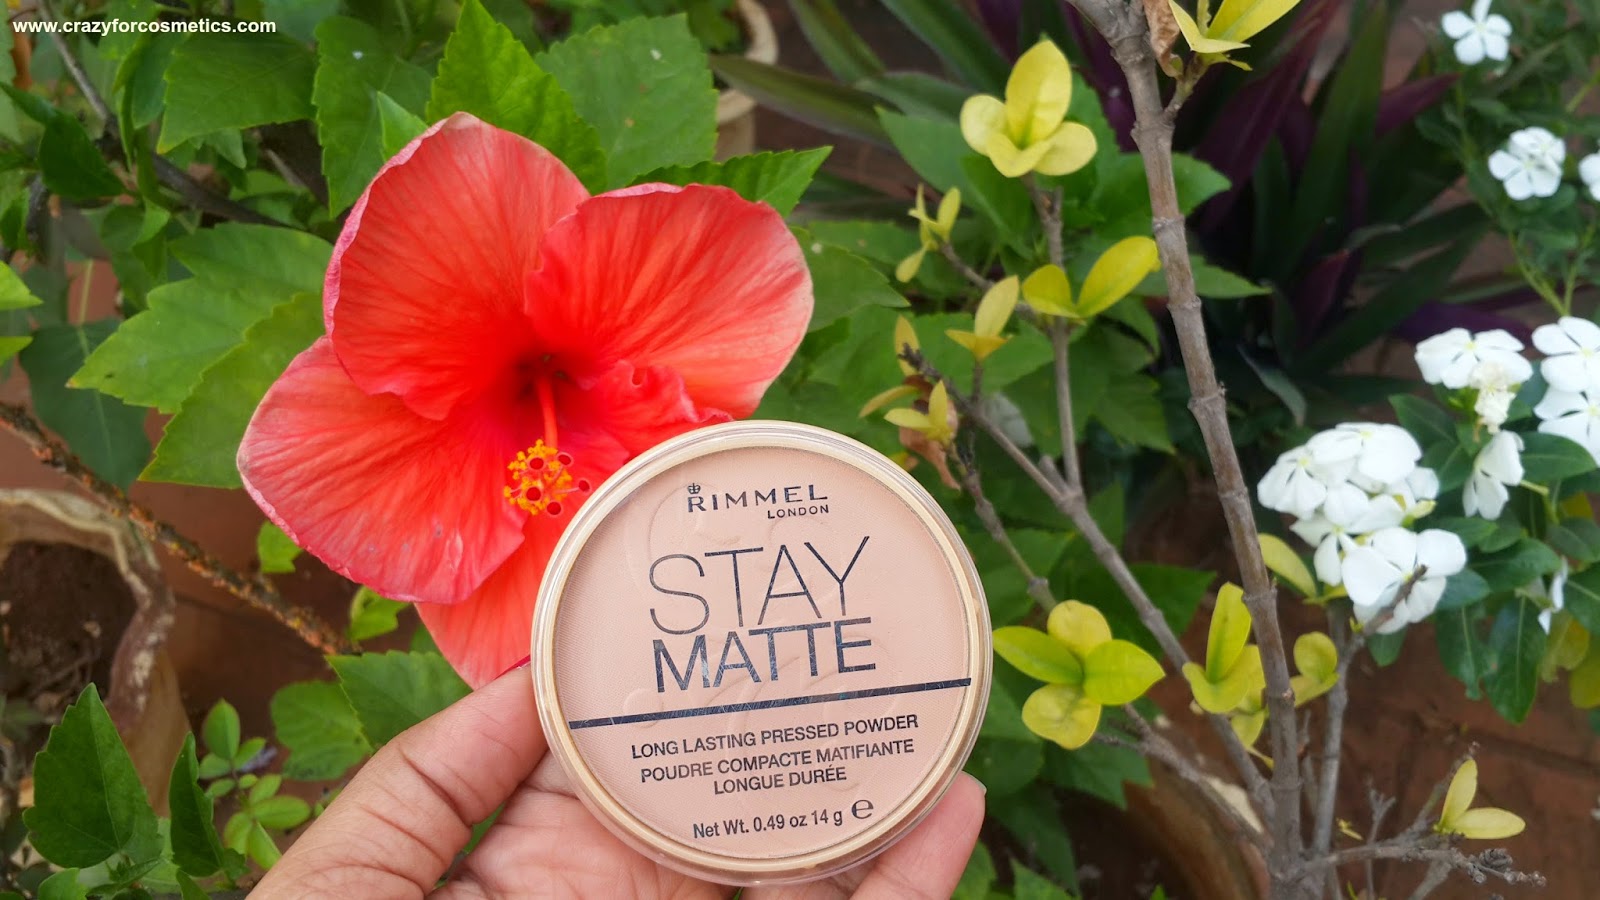 Rimmel London Stay Matte Pressed Powder 007 Mohair for summers